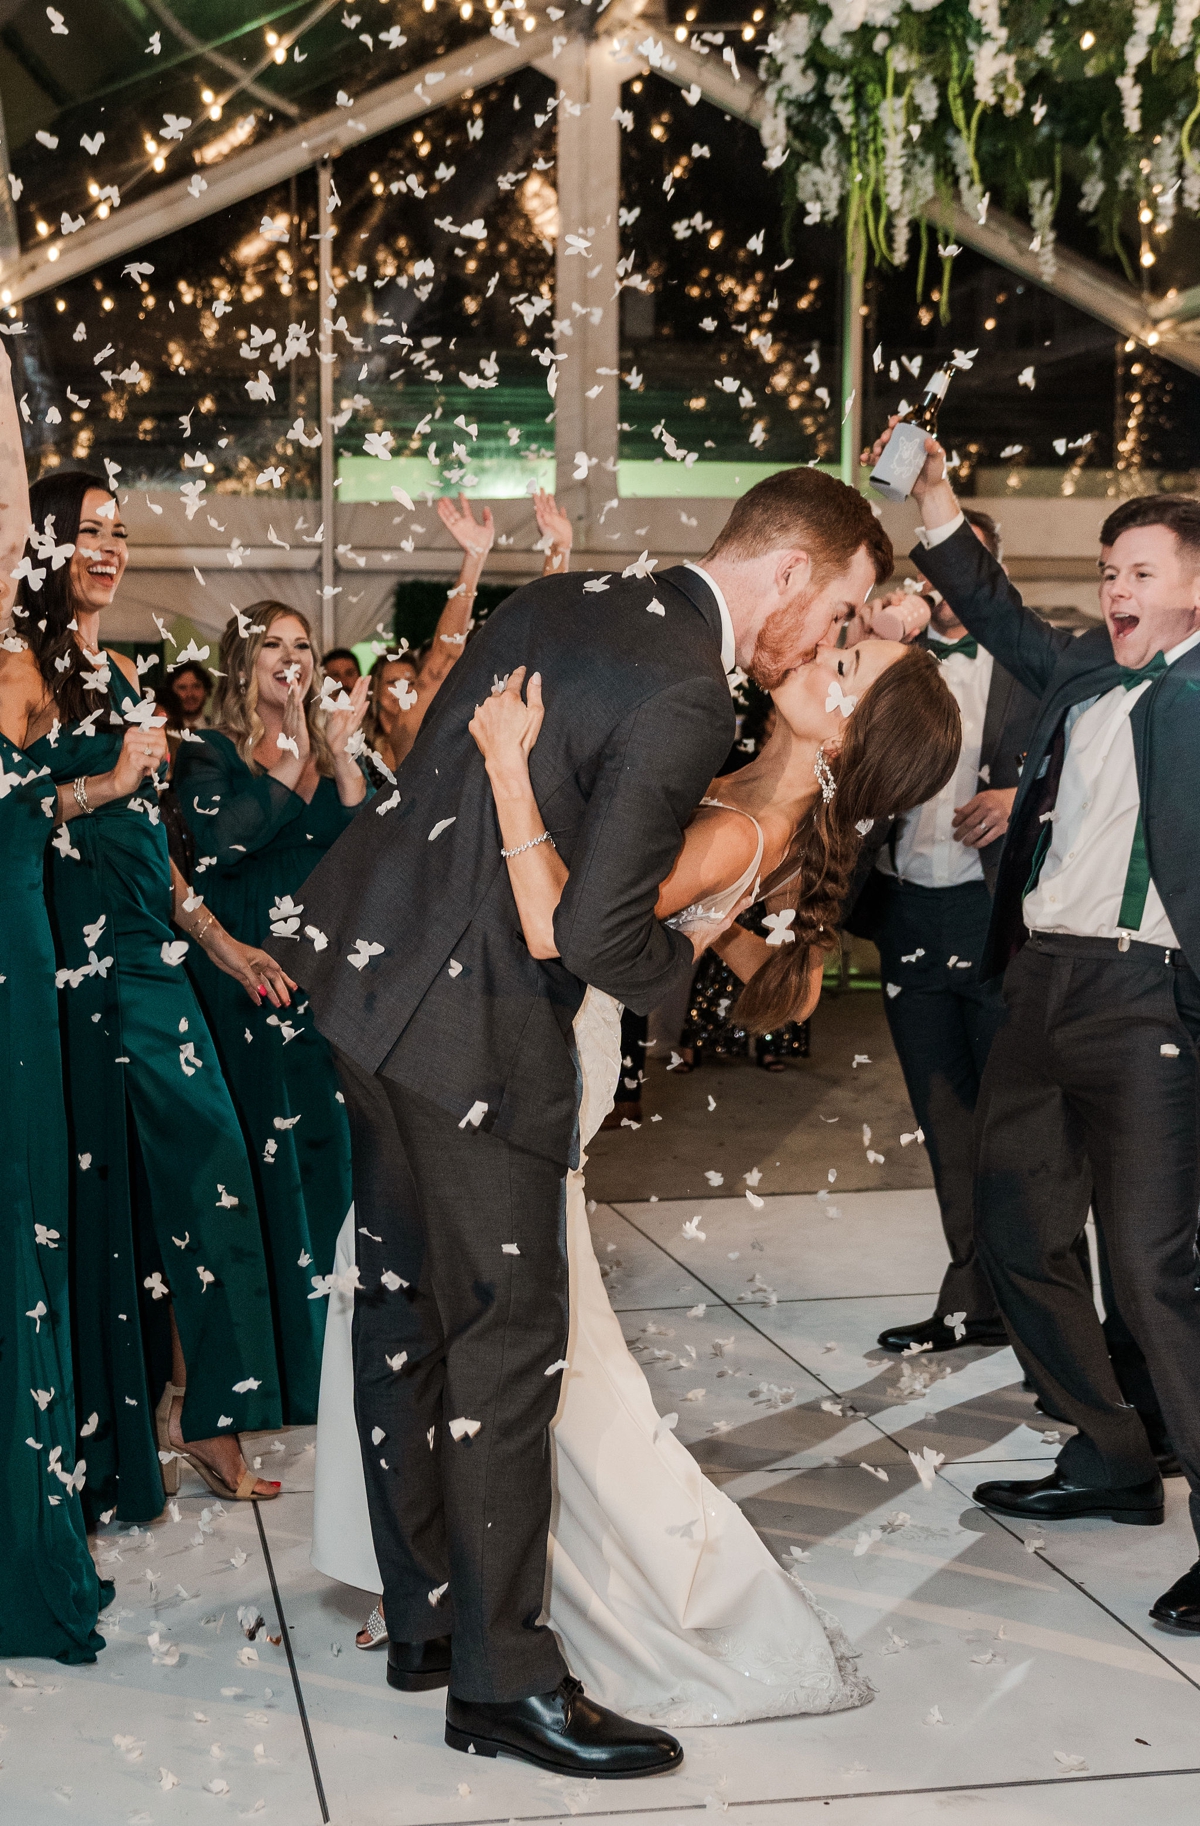 Bride and Groom celebrate by kissing through a tunnel of guests while confetti falls for their The Venue wedding